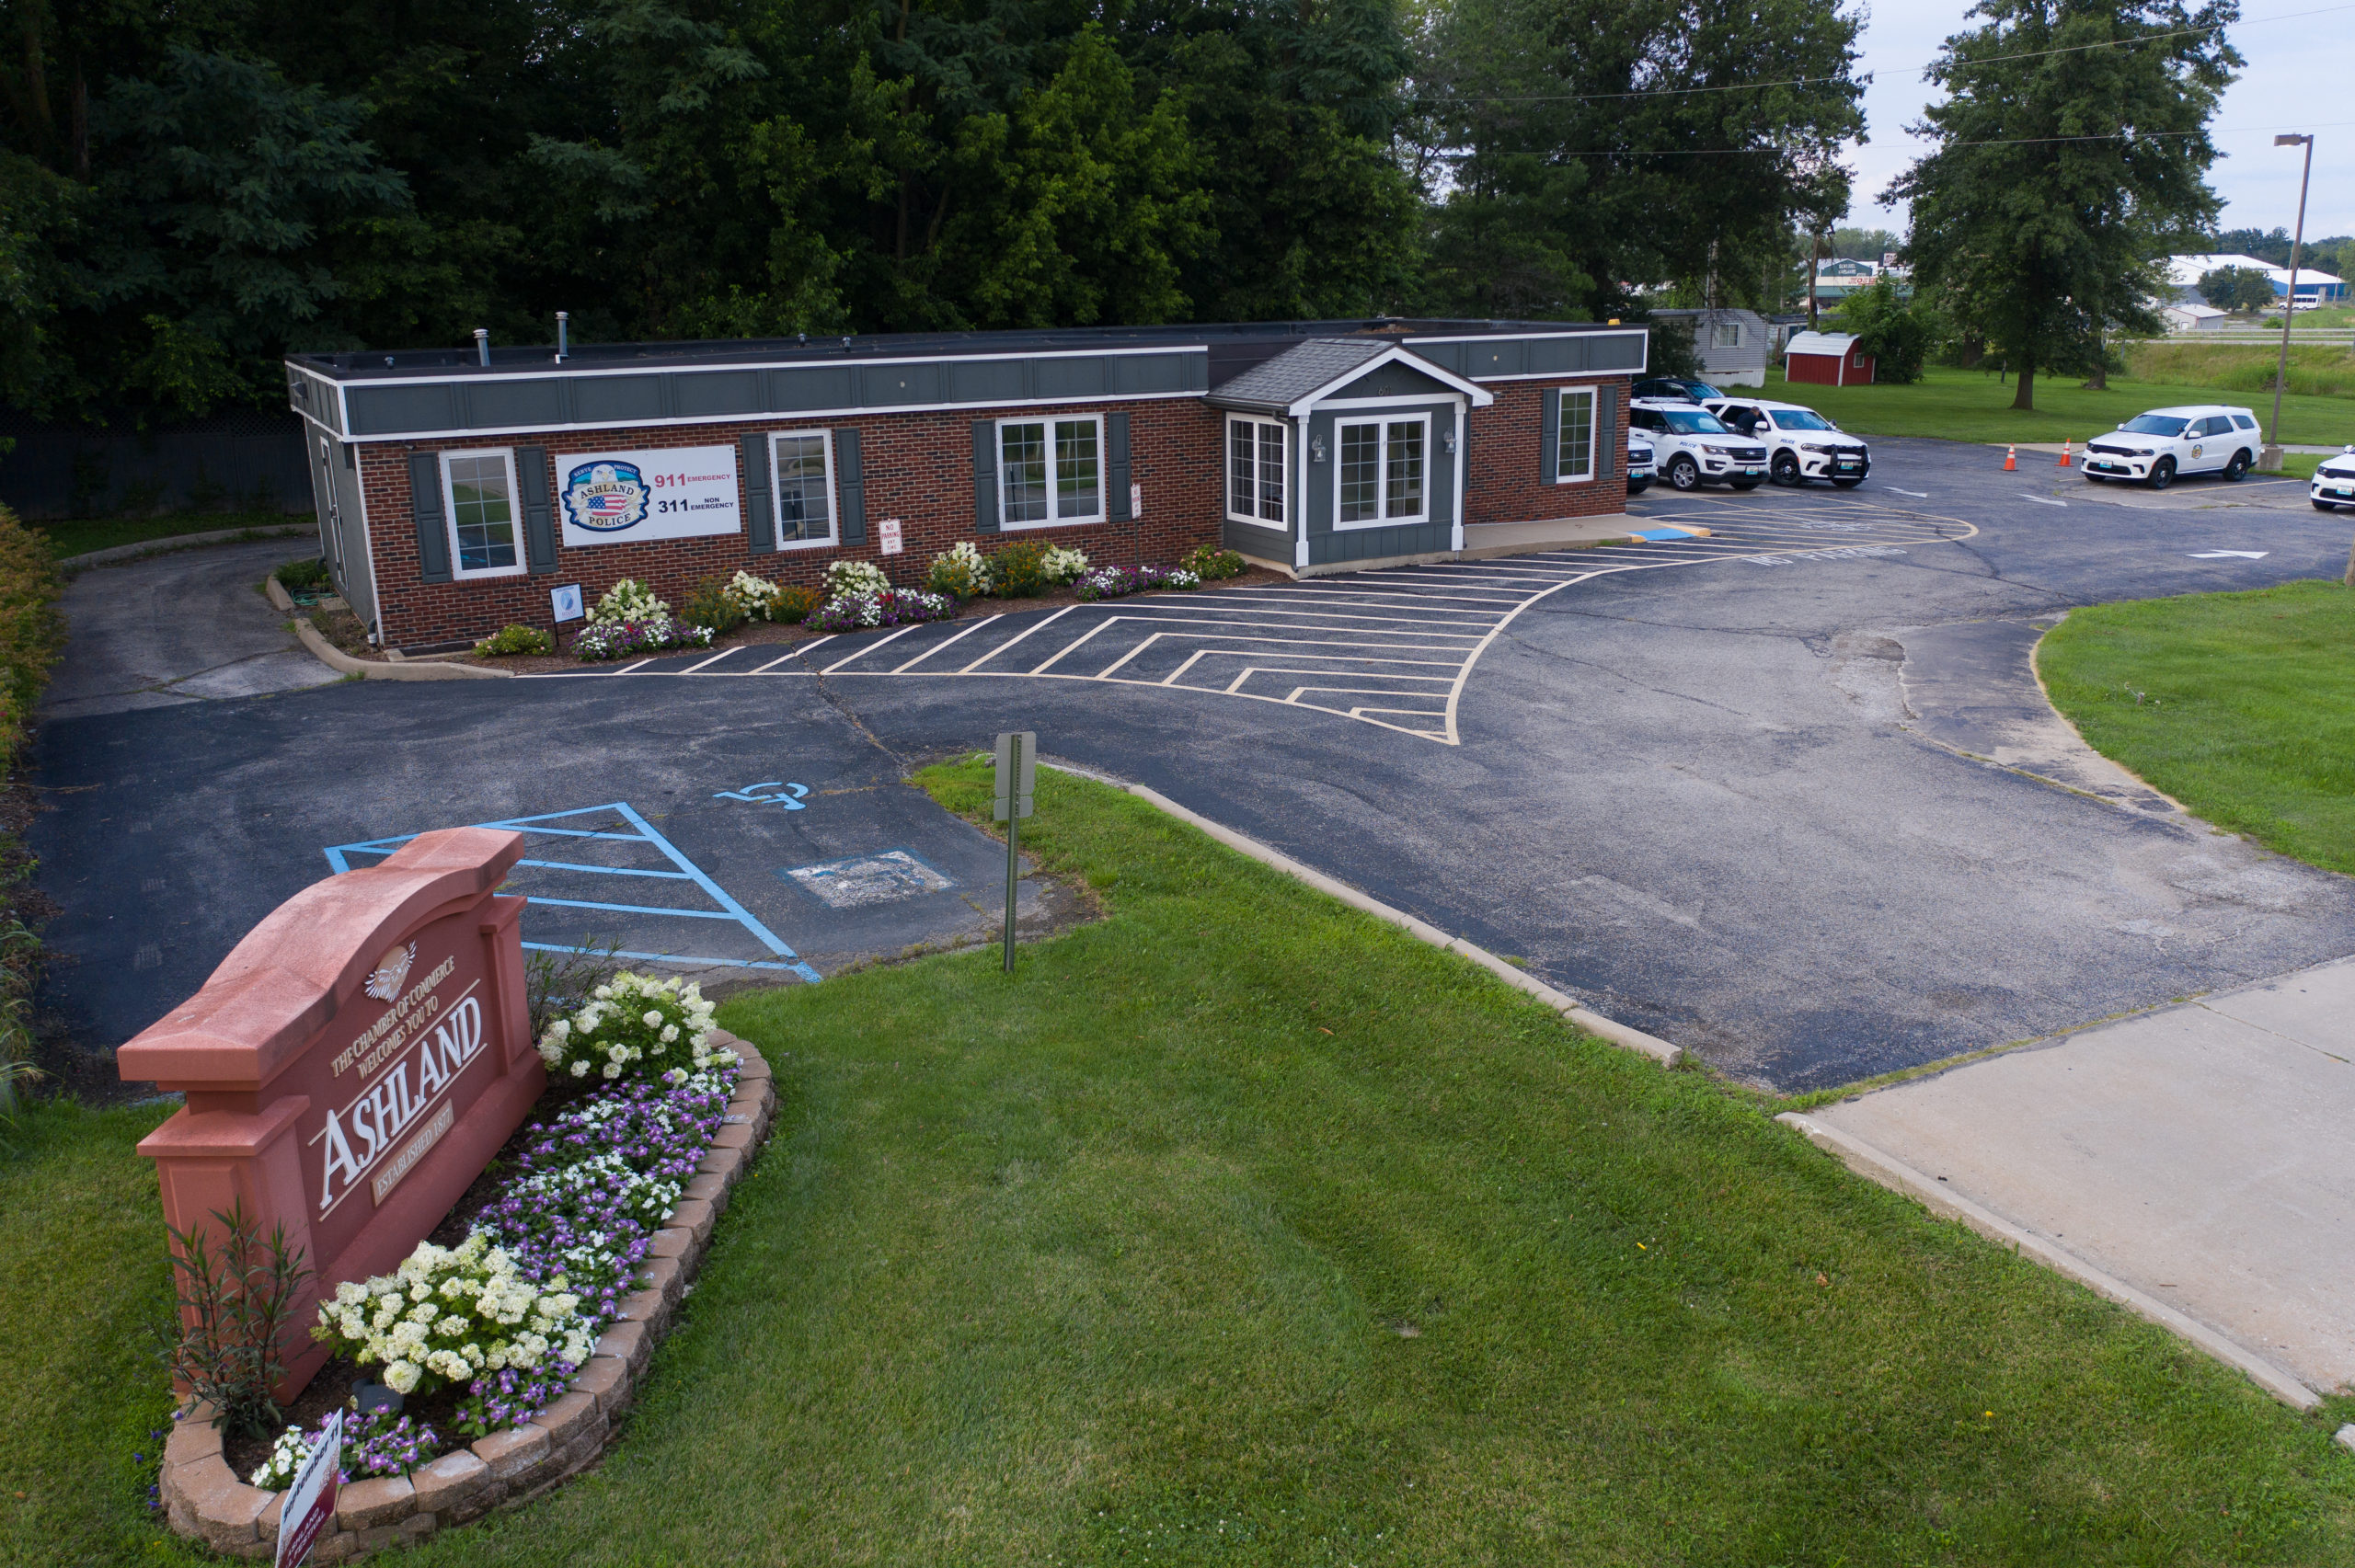 Ashland City Sell Police Department Building Boone County Journal